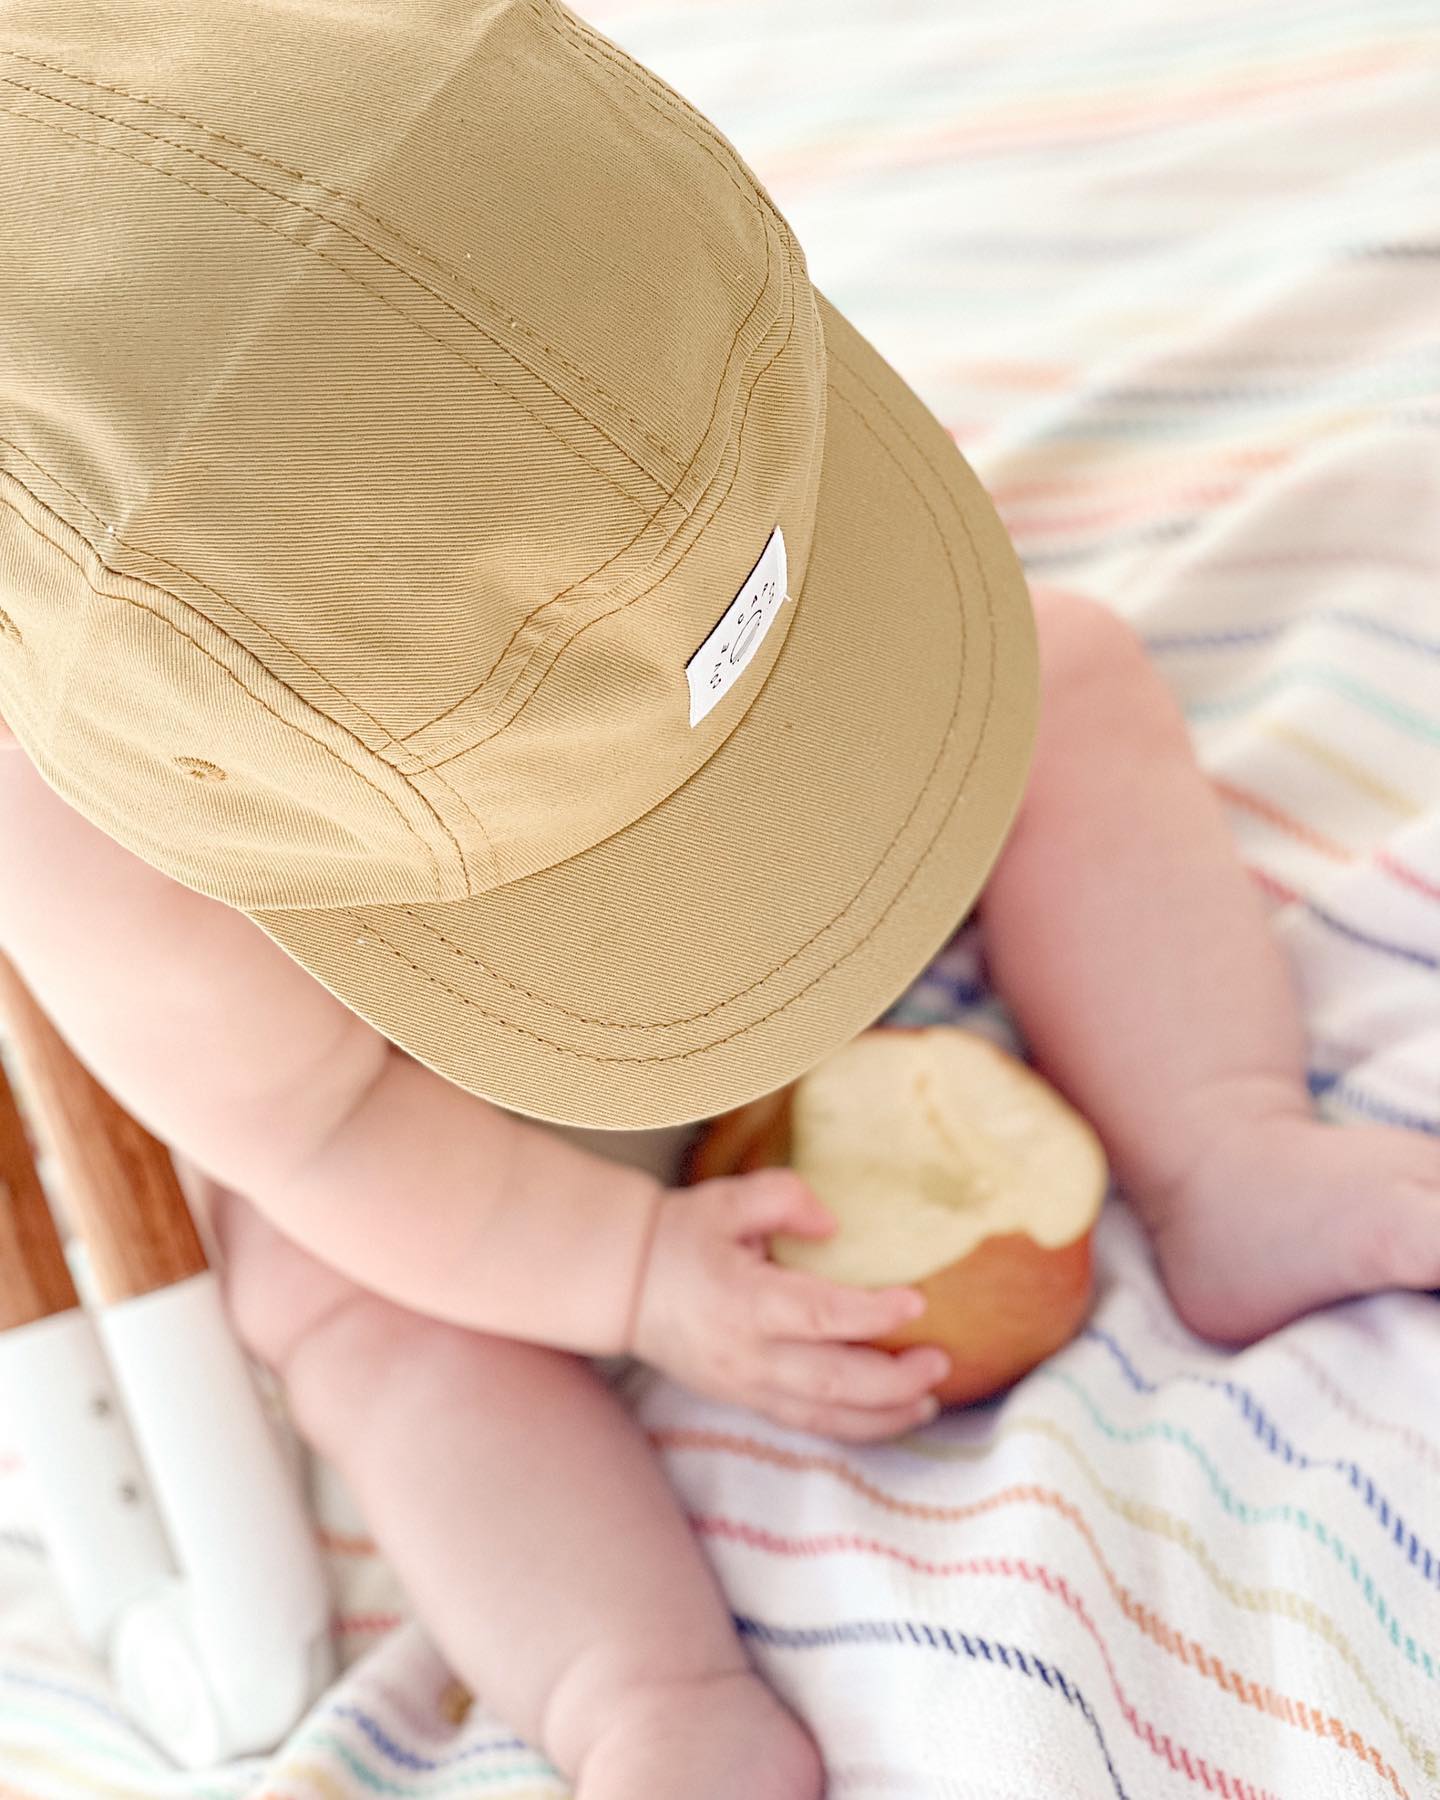 Toddler wearing a yellow sun hat while sitting on a blanket under a beach umbrella. Mustard yellow hat is a minimalist five-panel design, made in Canada out of organic cotton. 